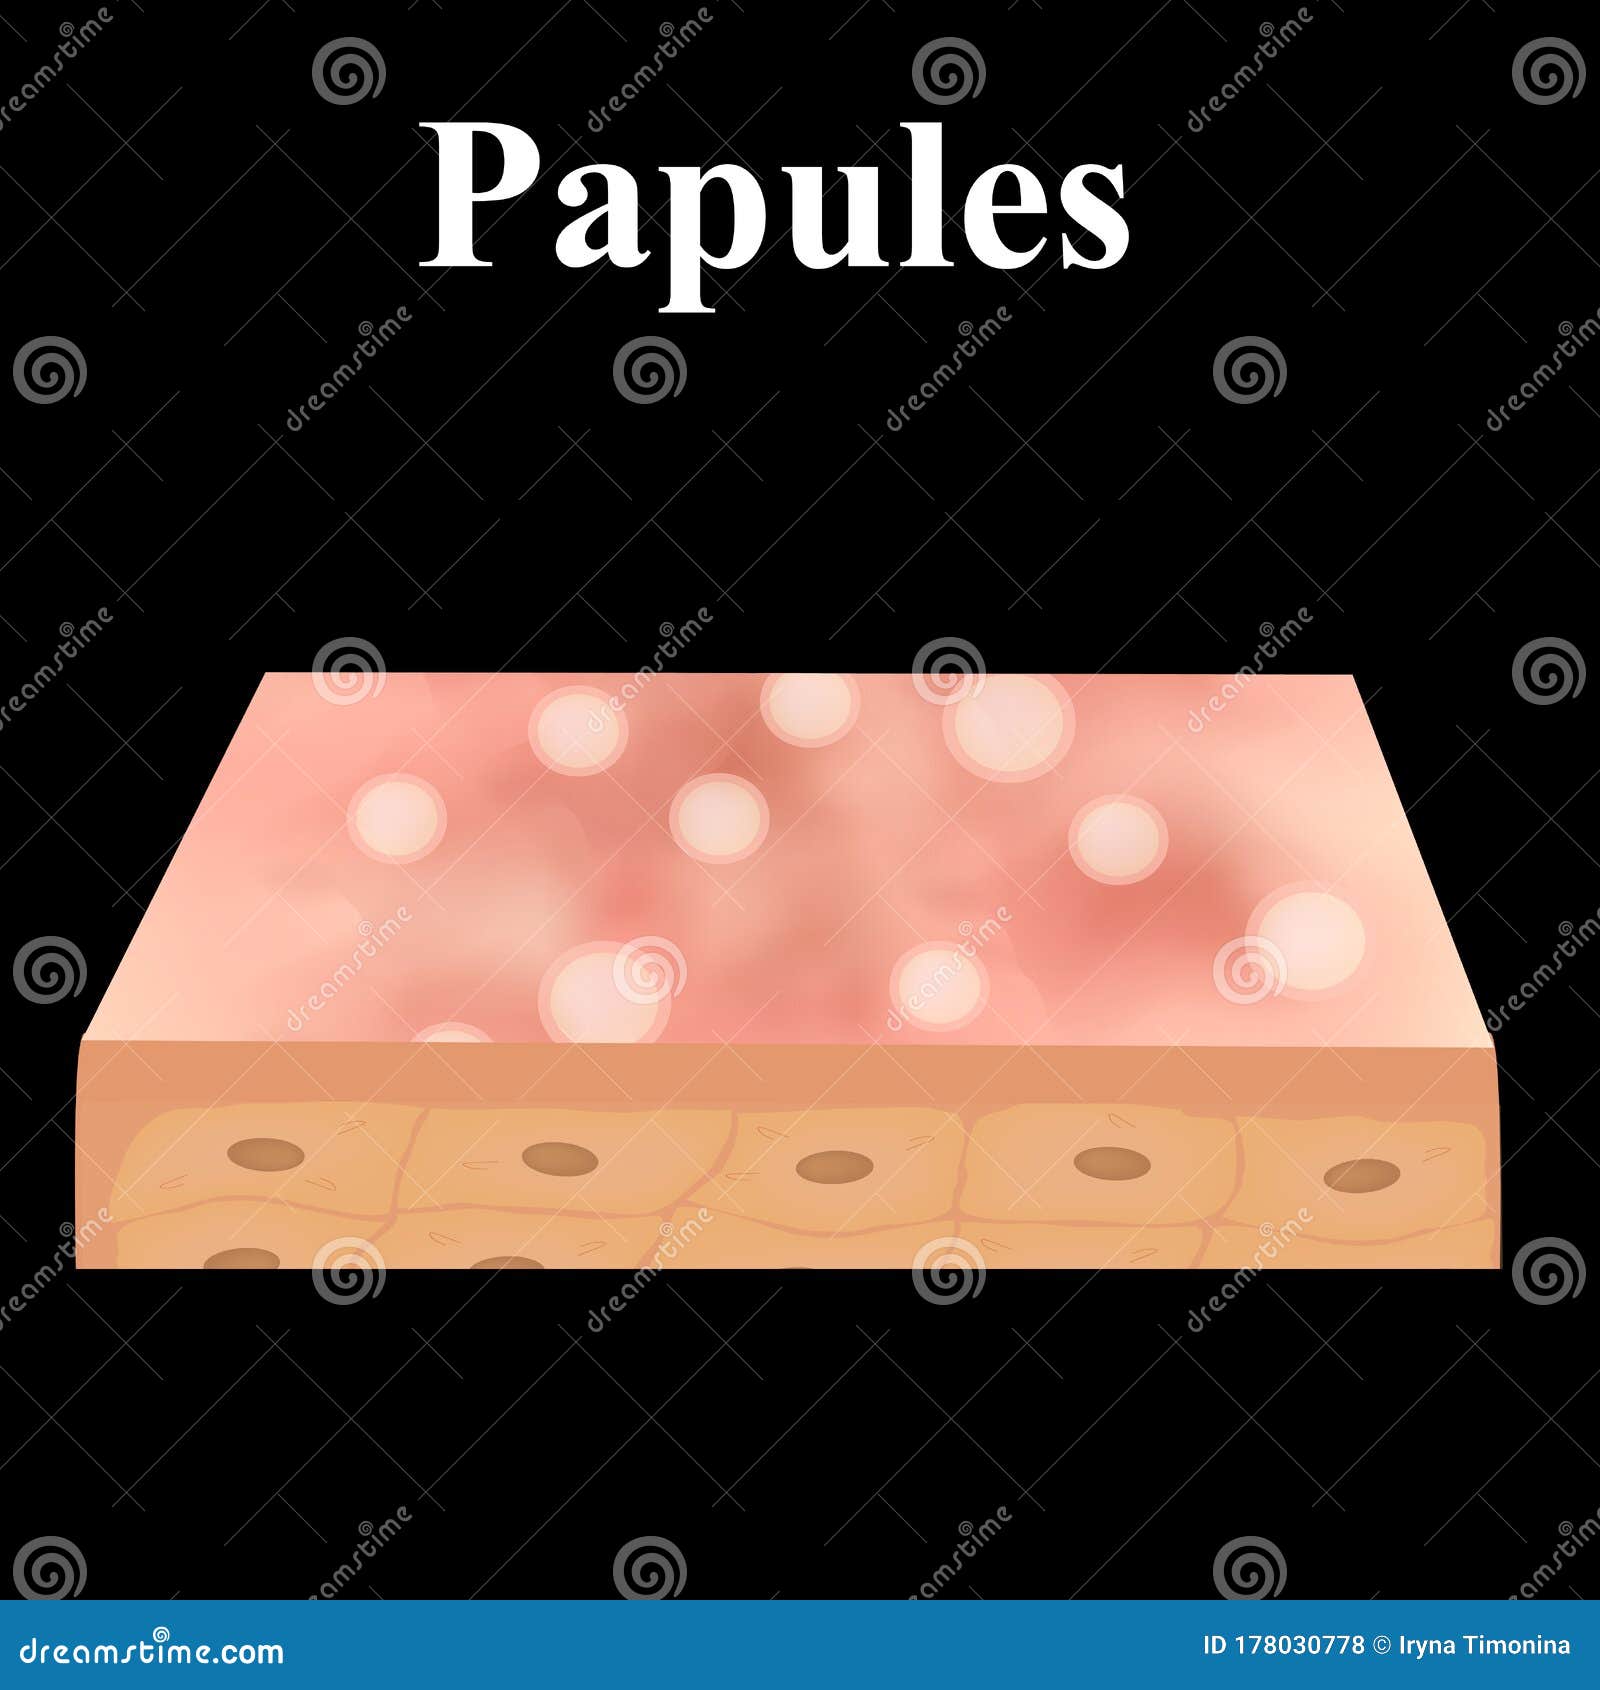 Papules. Acne on the Skin. Dermatological and Cosmetic Diseases on the ...